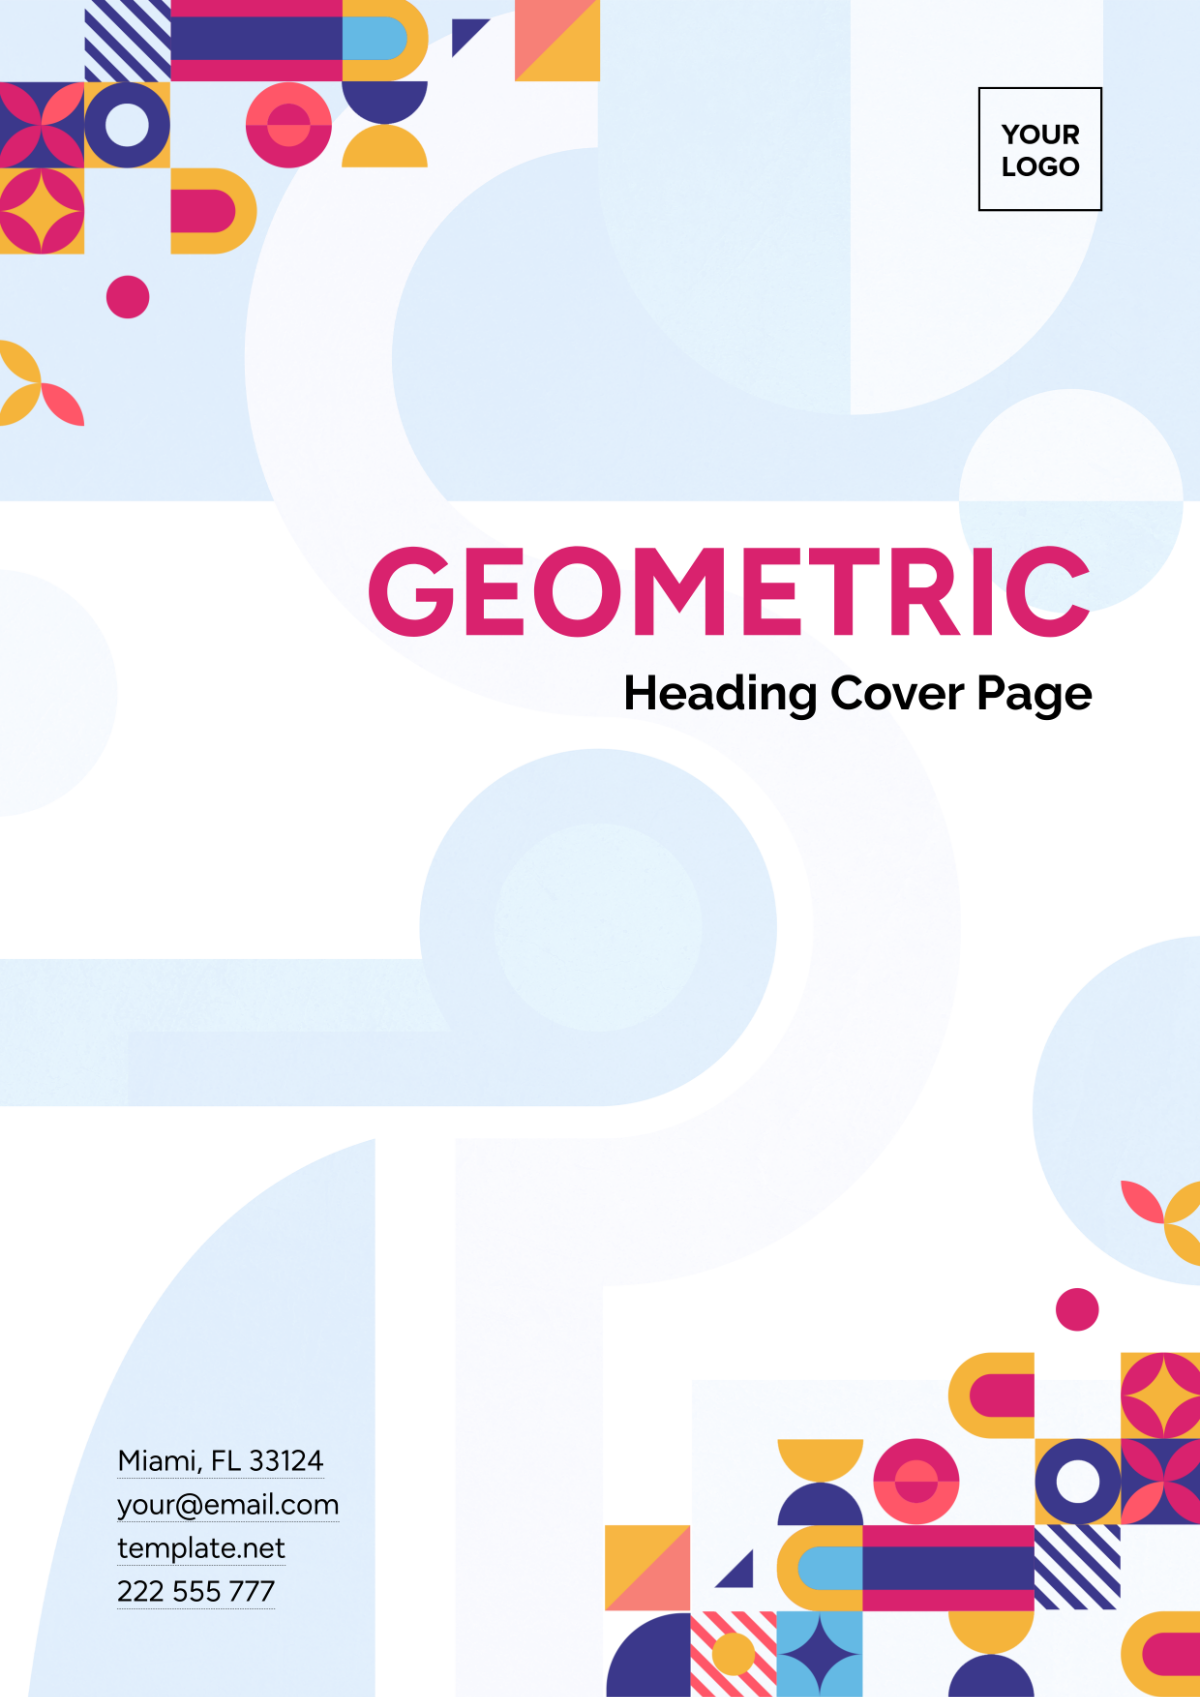 Geometric Heading Cover Page